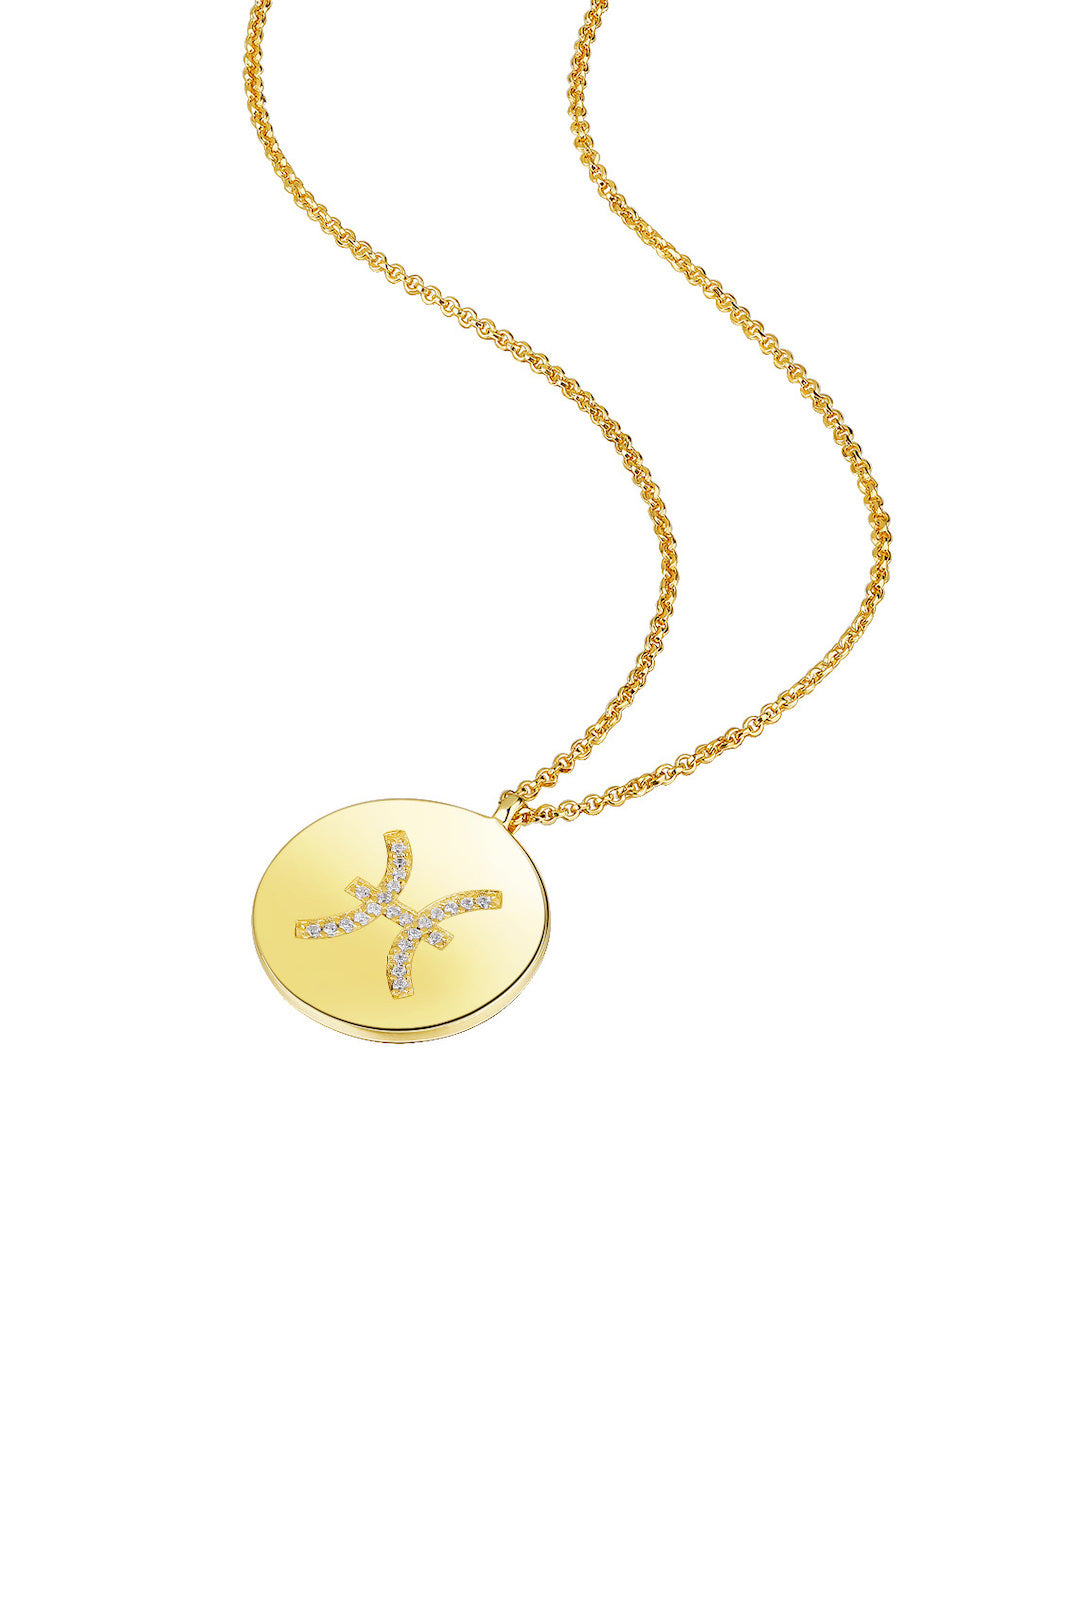 Gold Plated Silver Zodiac Necklace - Pisces Side